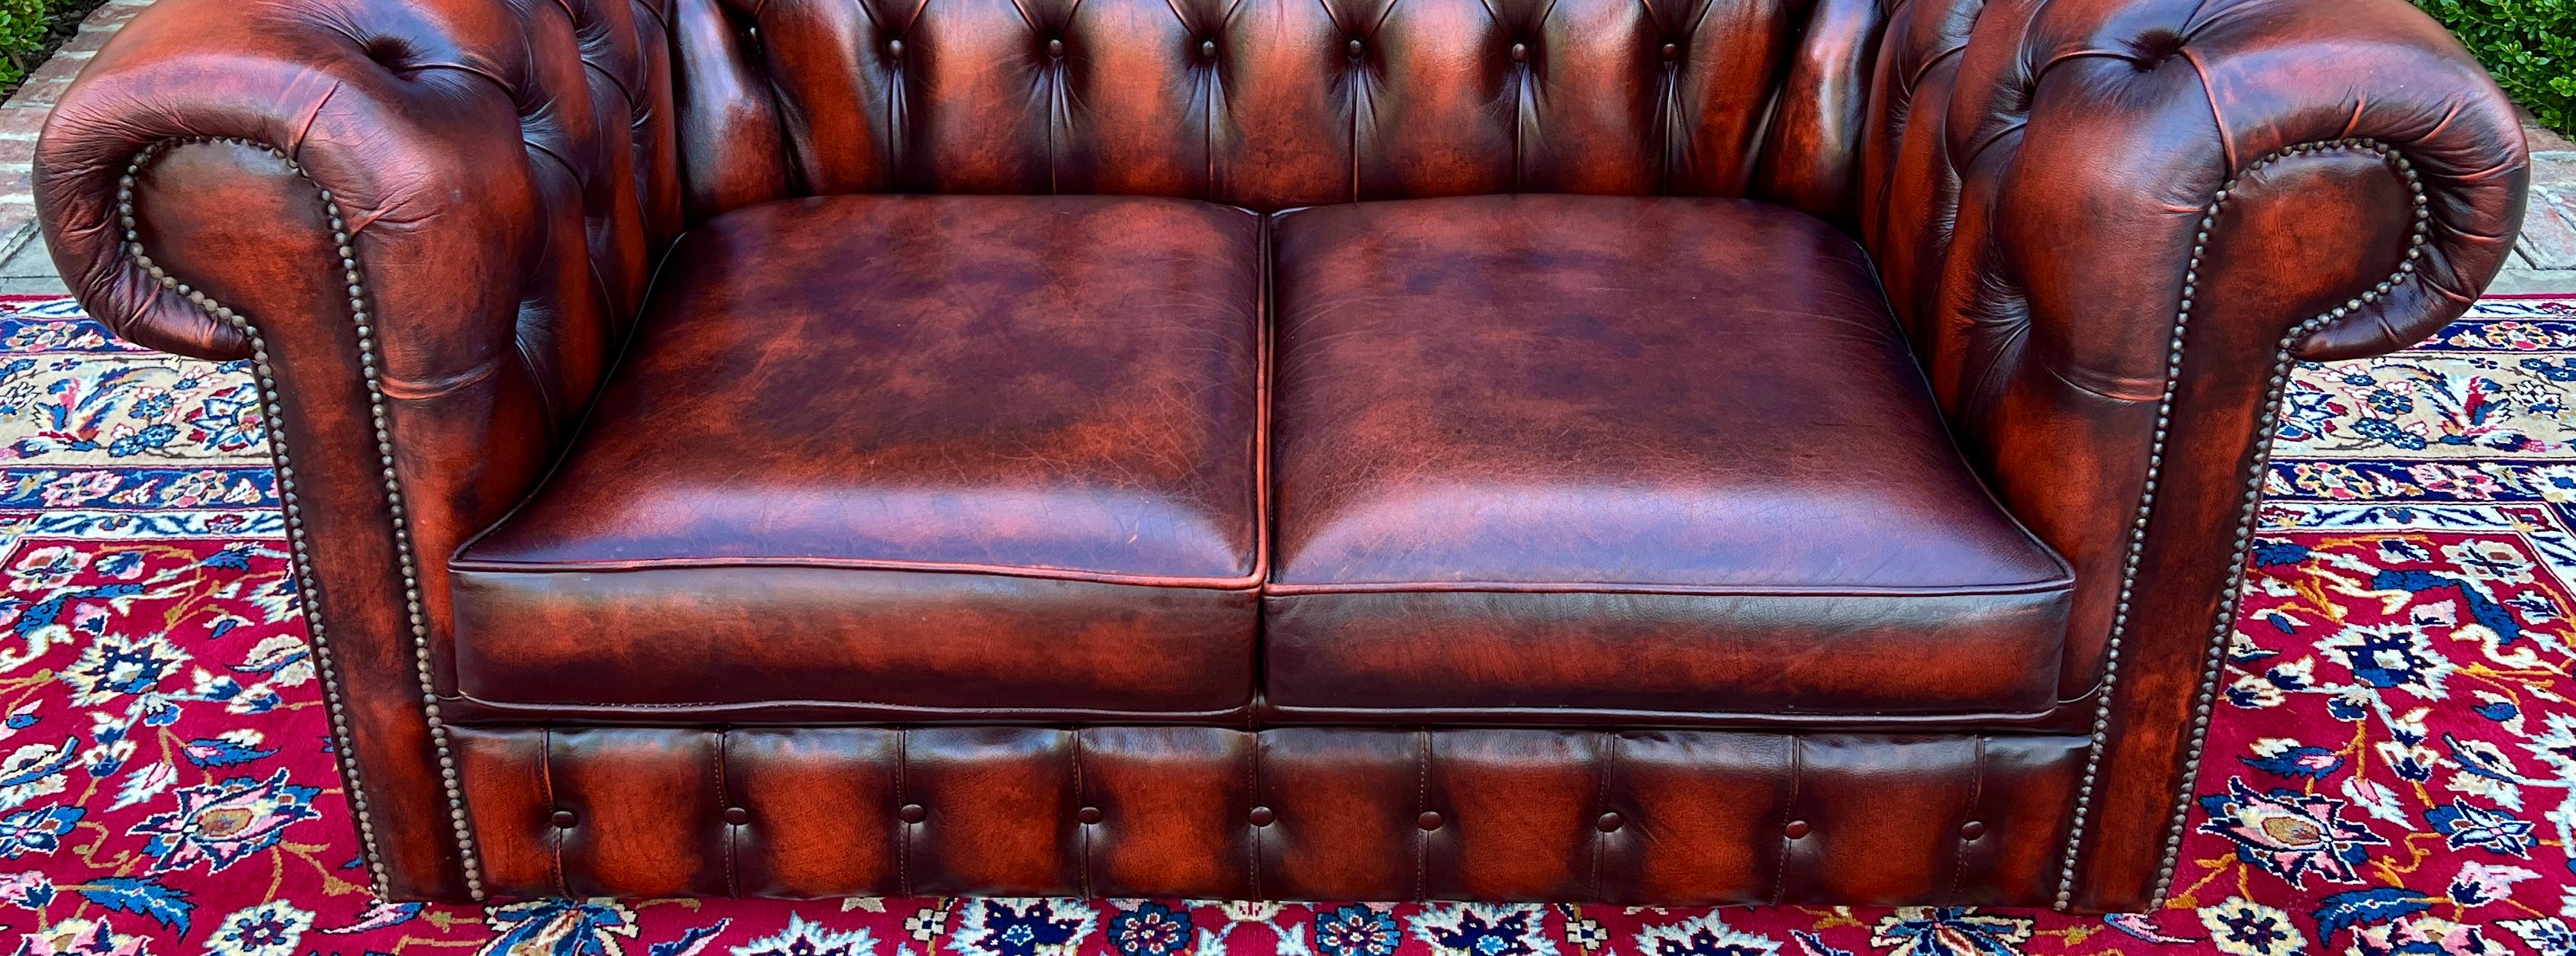 Vintage English Chesterfield Leather Tufted Love Seat Sofa Oxblood Red #2 For Sale 14